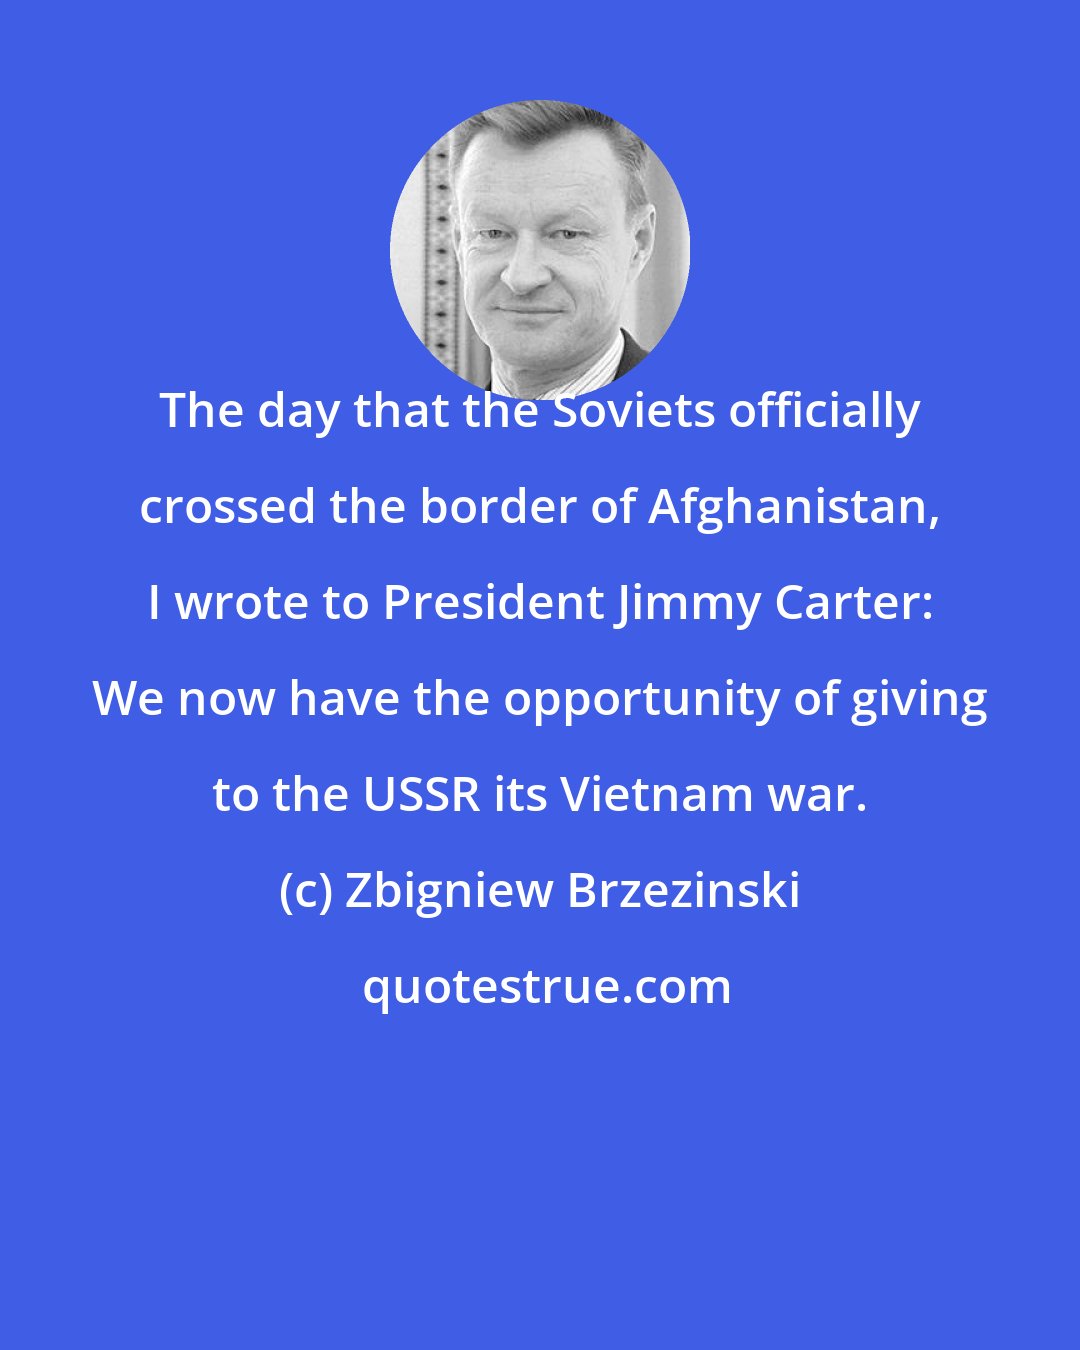 Zbigniew Brzezinski: The day that the Soviets officially crossed the border of Afghanistan, I wrote to President Jimmy Carter: We now have the opportunity of giving to the USSR its Vietnam war.